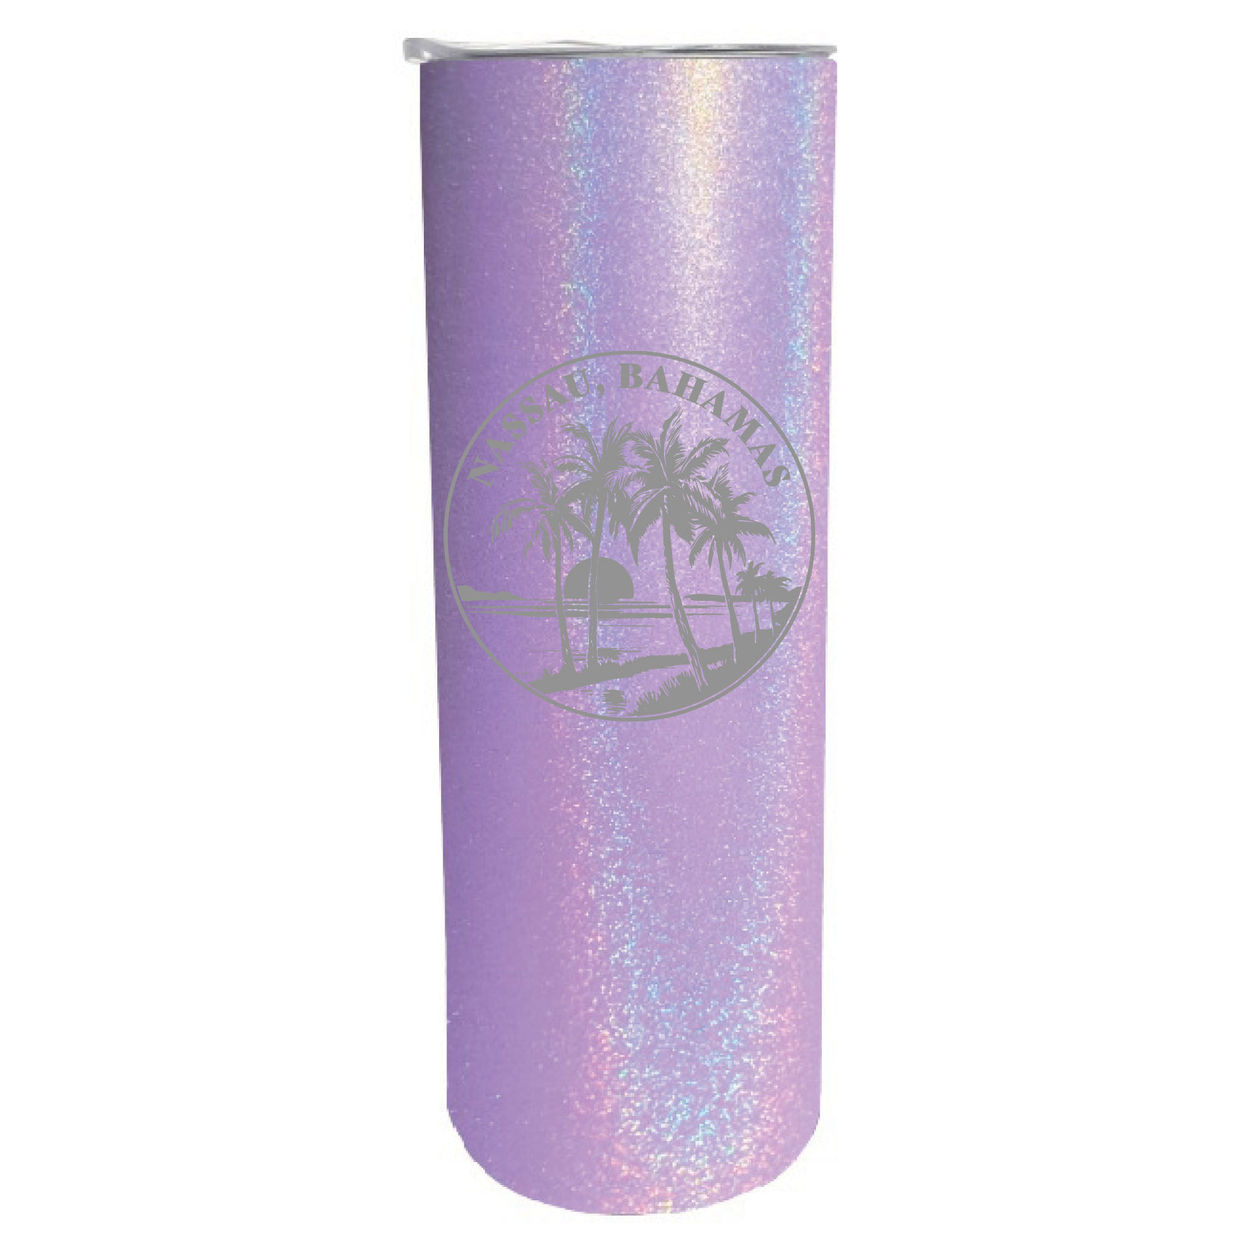 Nassau The Bahamas Souvenir 20 Oz Engraved Insulated Stainless Steel Skinny Tumbler - Navy,,2-Pack